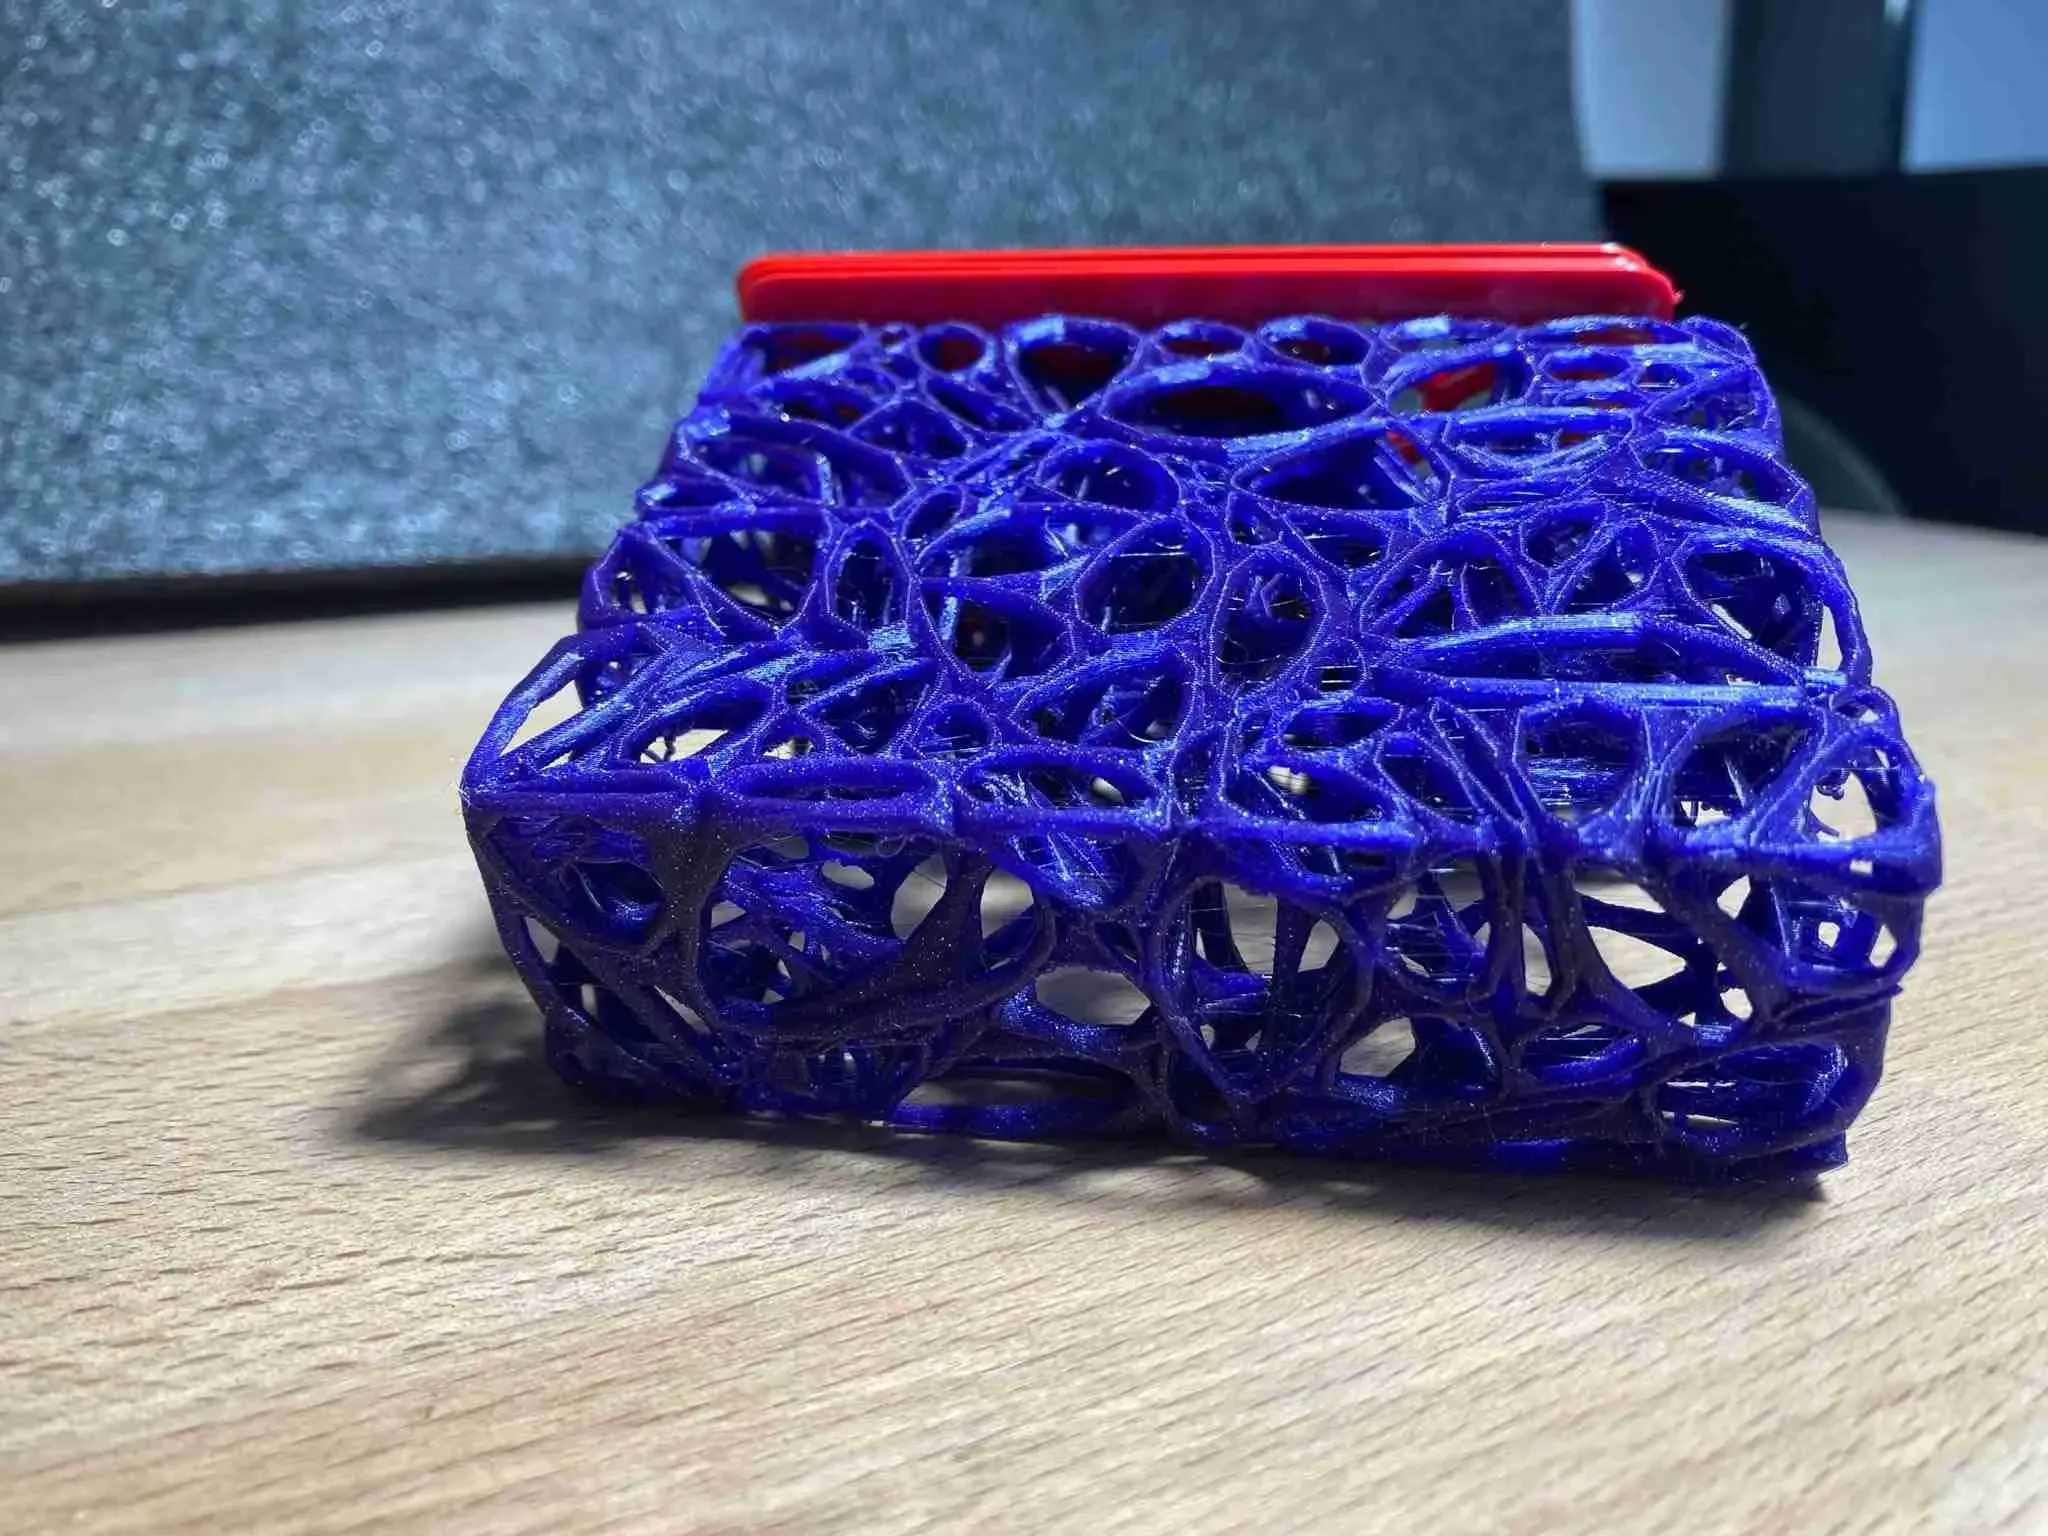 Voronoi business card stand